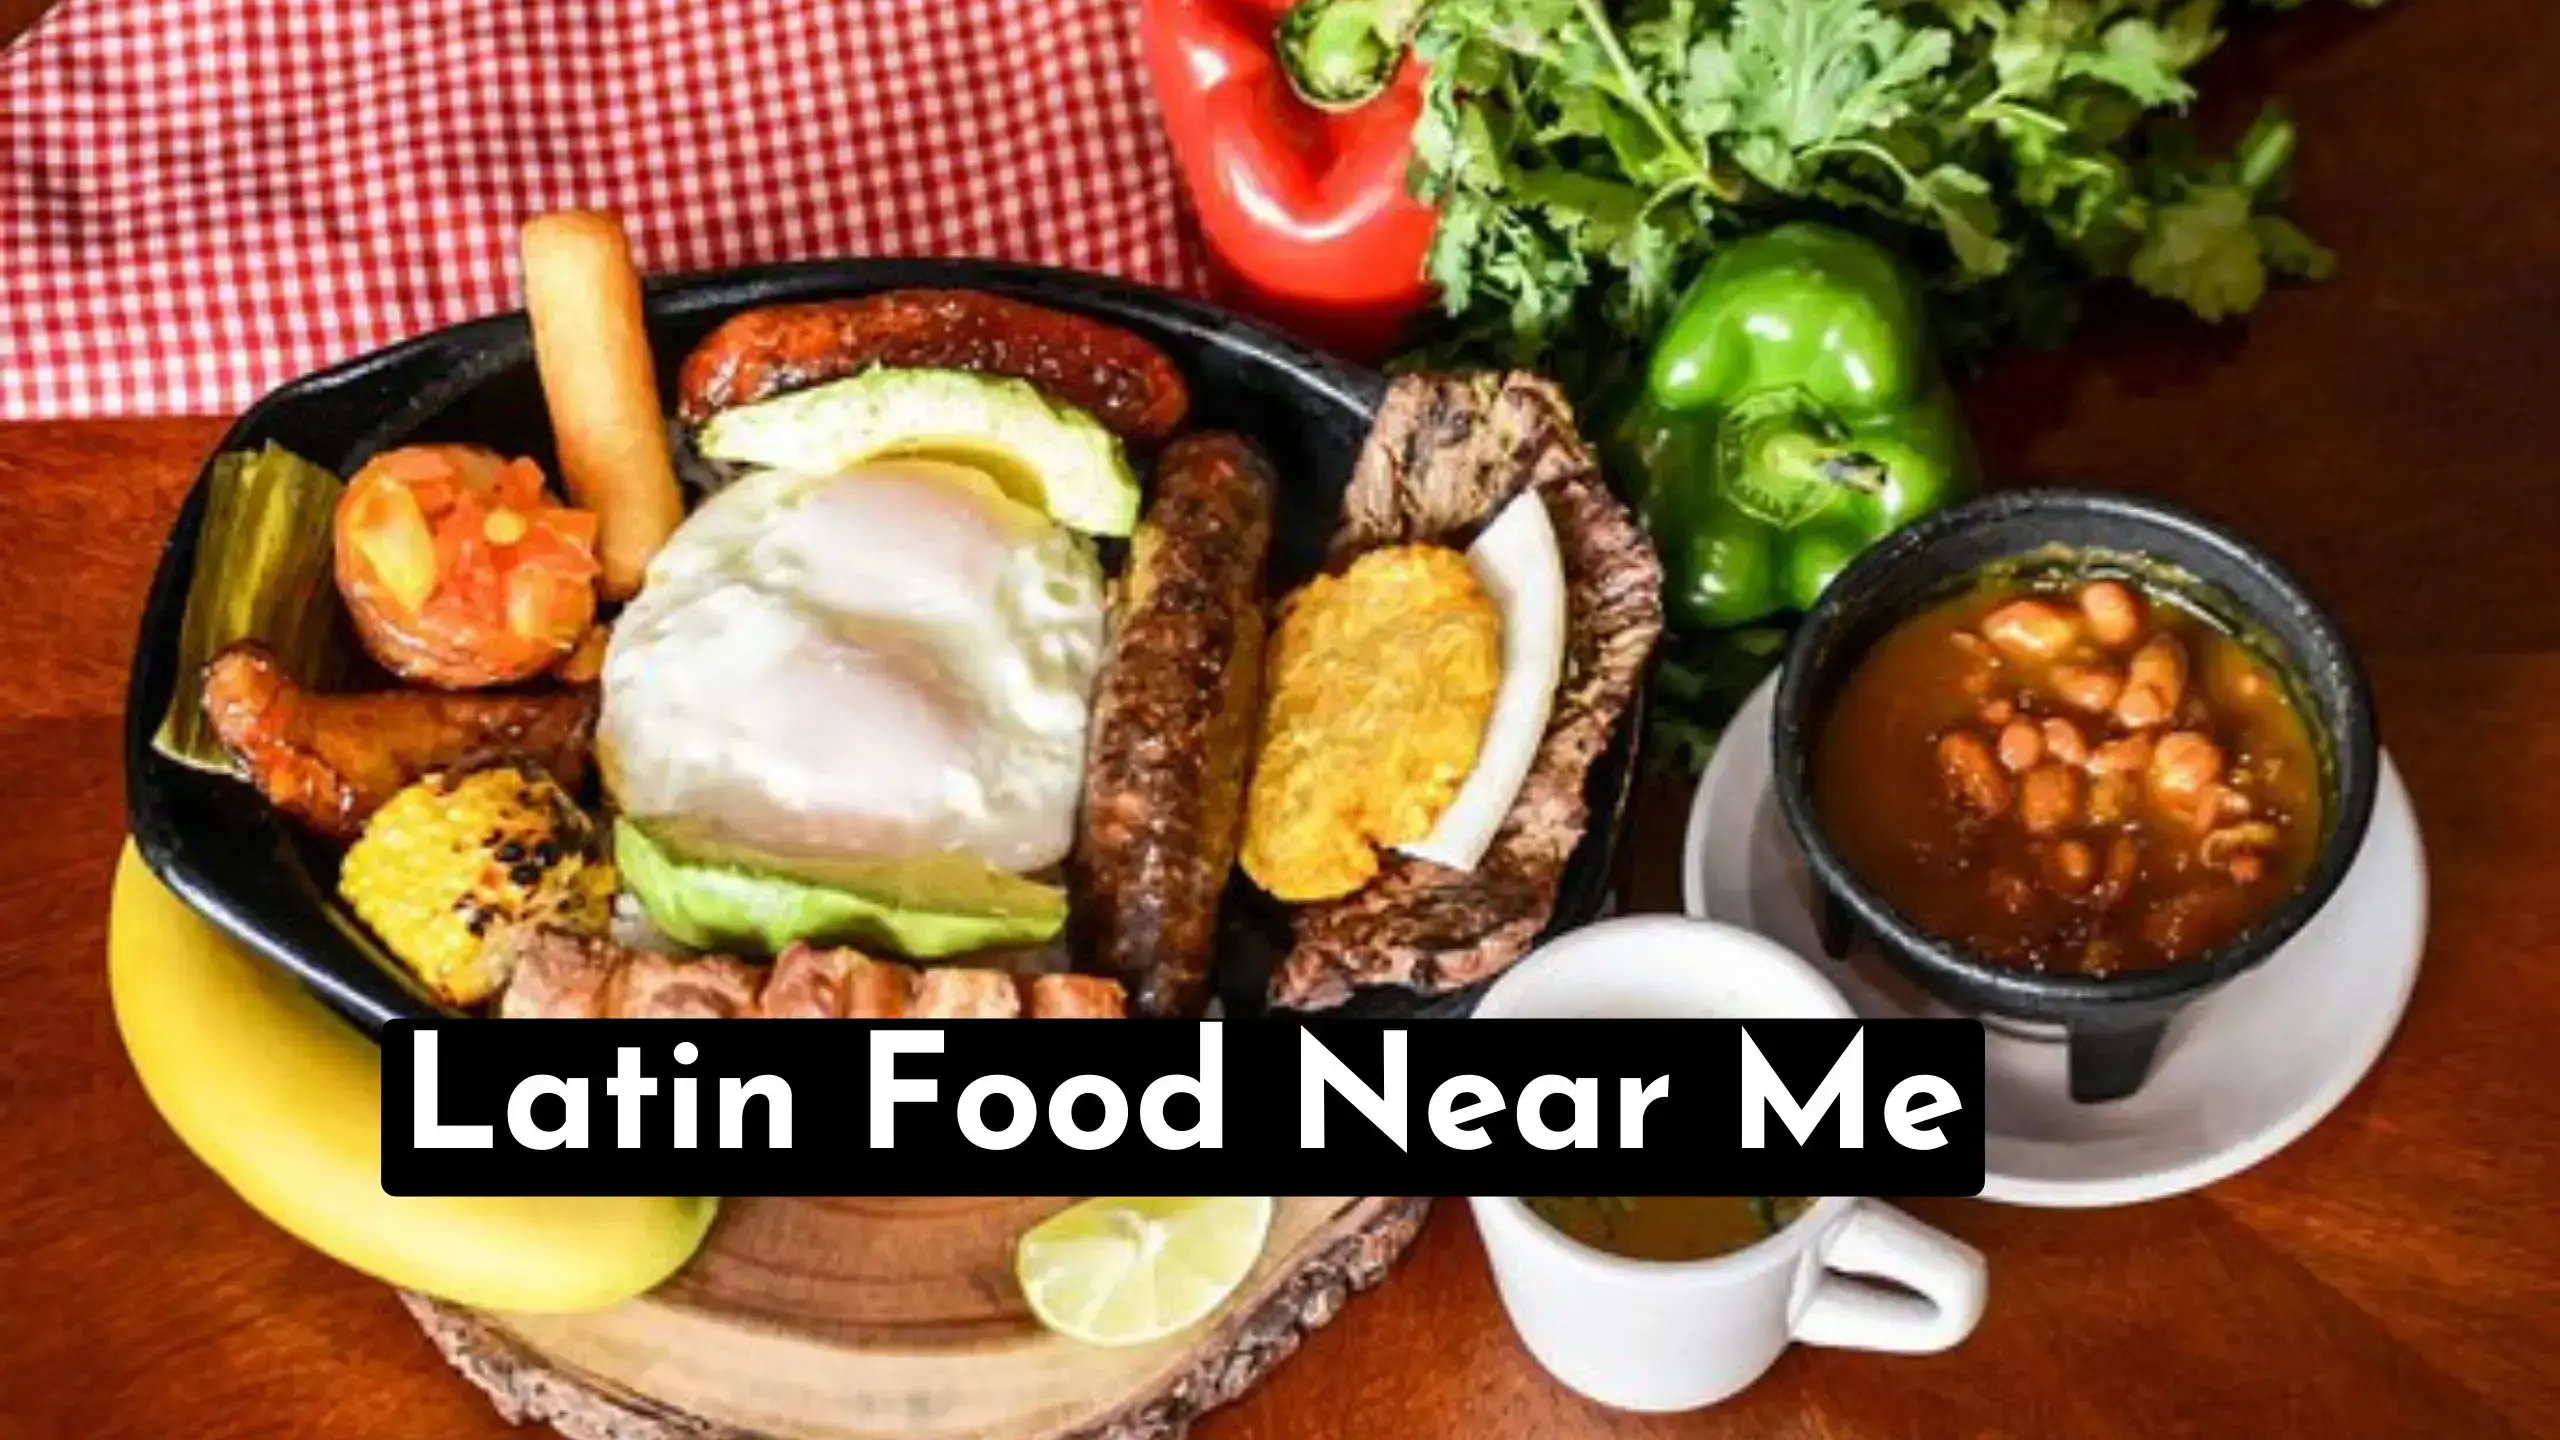 A Quick Guide To Discover Latin Food Near Me Locations | Also Quickly Find The Best Latin American Cuisine With Important FAQs. open-near-me.com